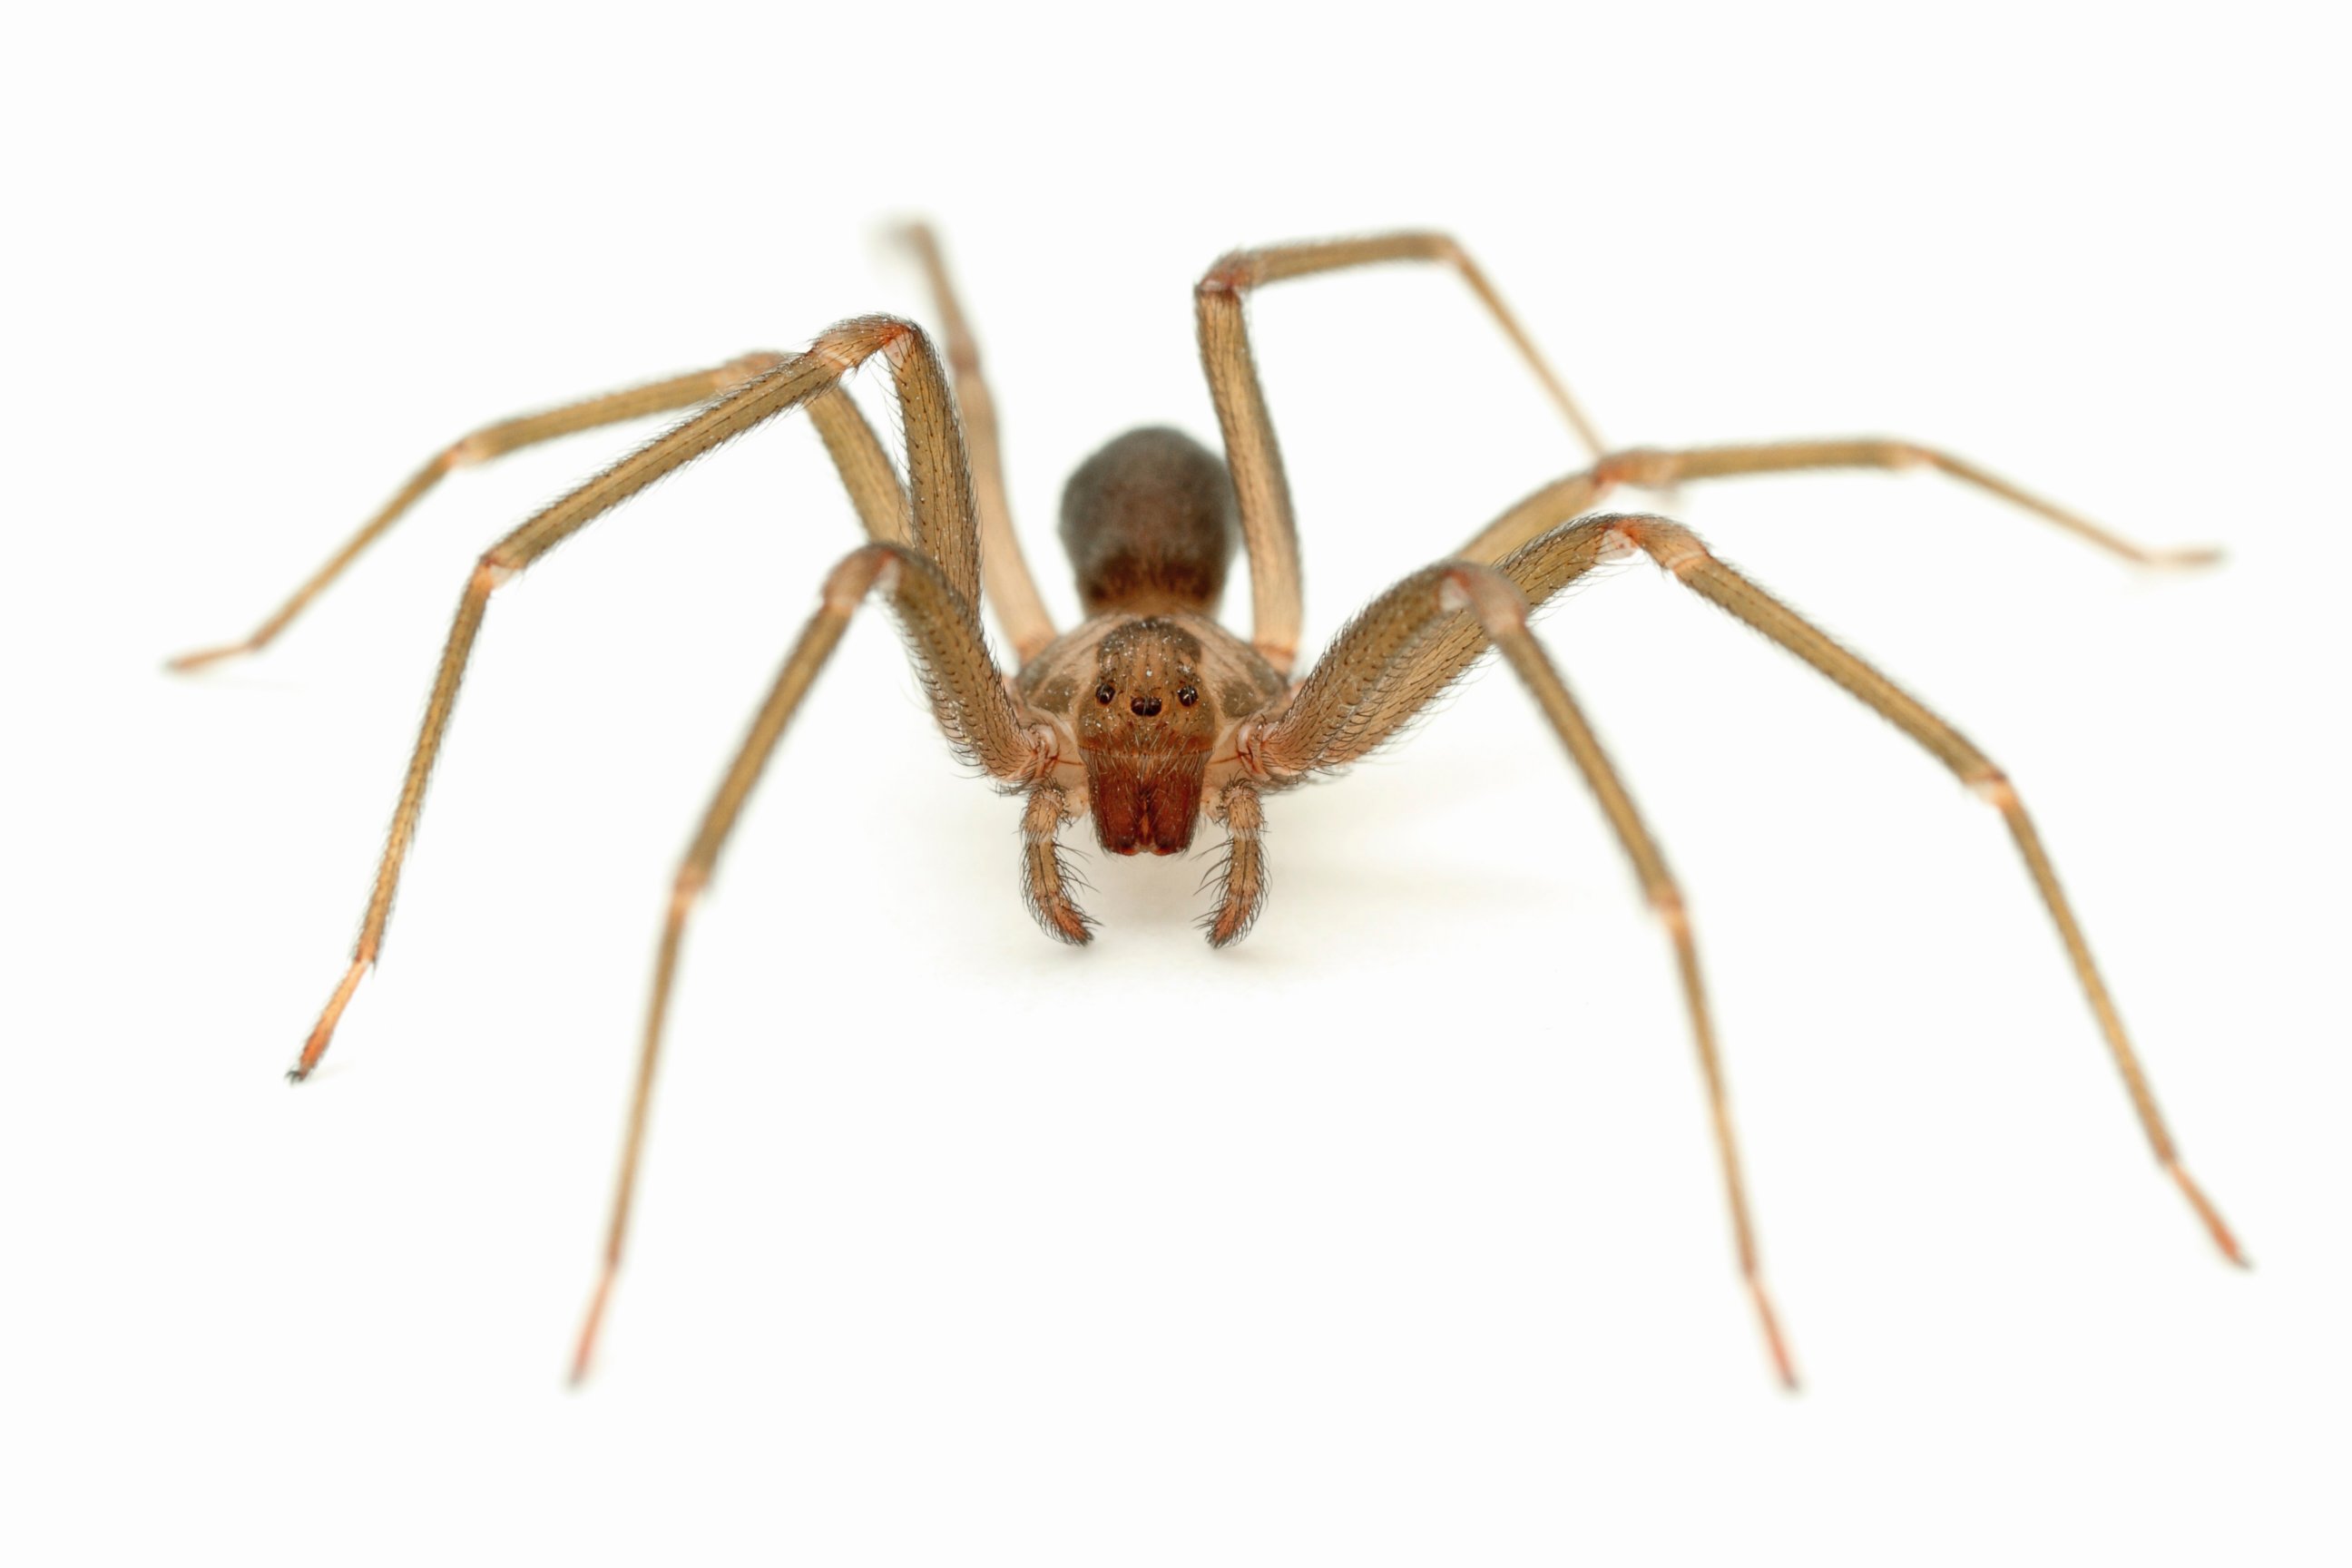 PHOTO: Brown recluse spiders are found in the south and Midwestern parts of the country.